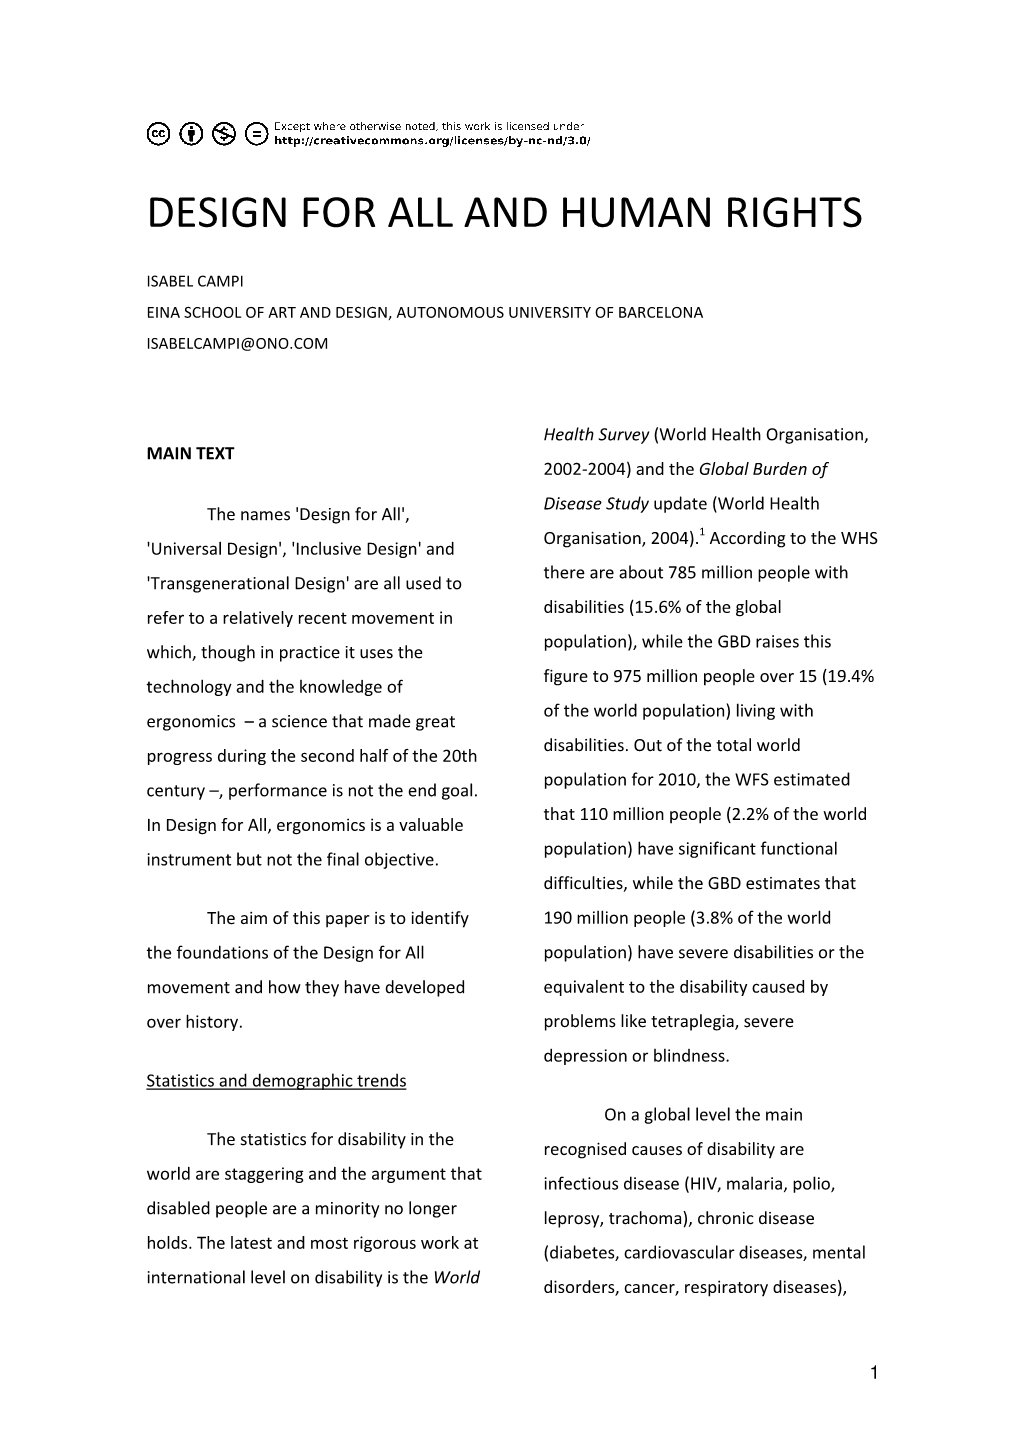 Campi, Isabel DESIGN for ALL and HUMAN RIGHTS